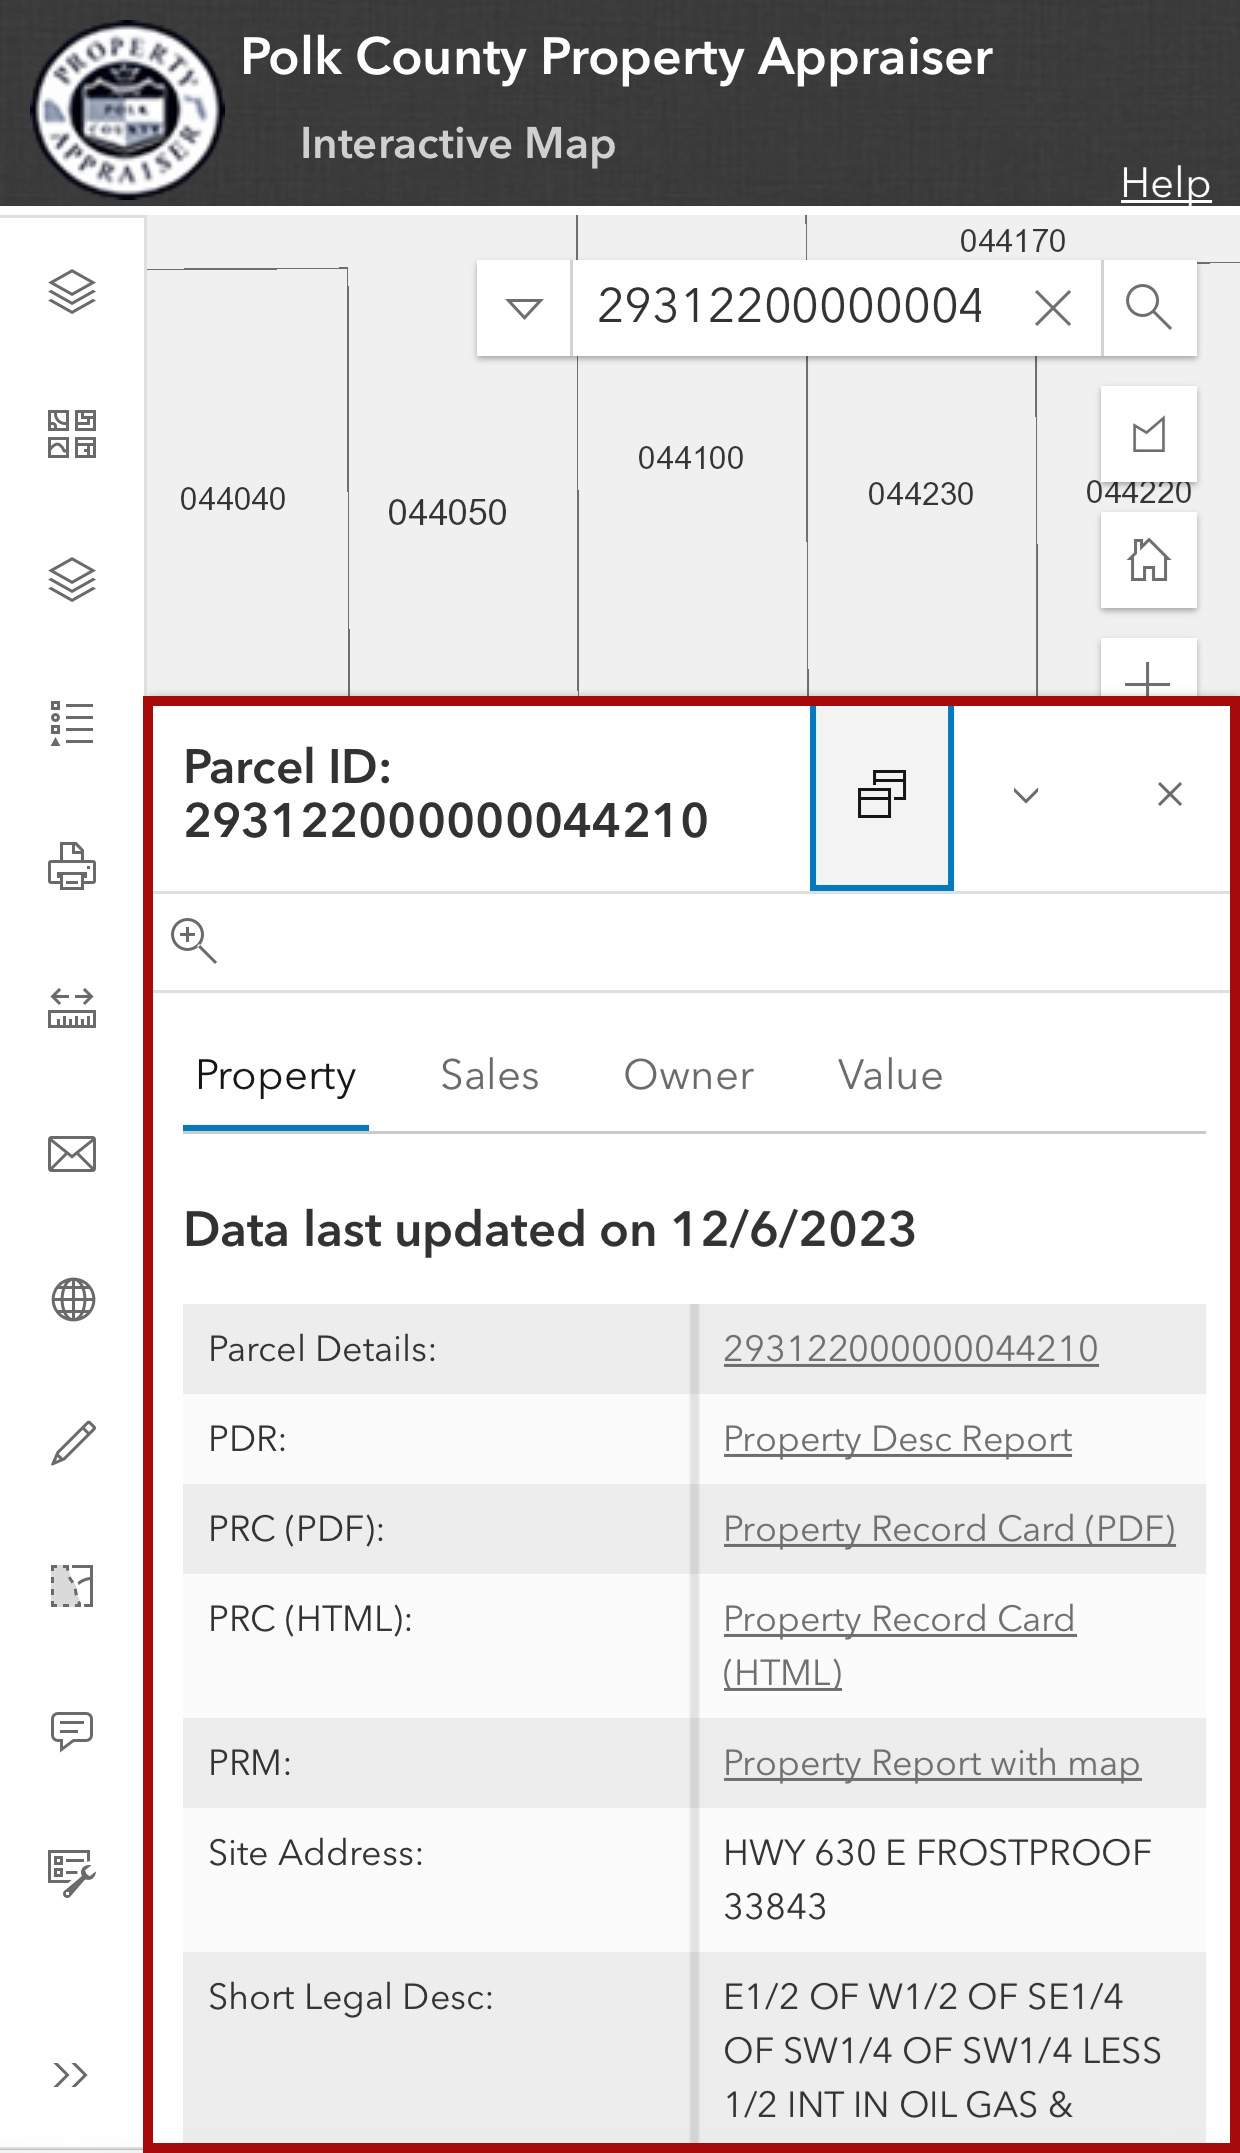 Mobile Version with parcel information docked and uncollapsed